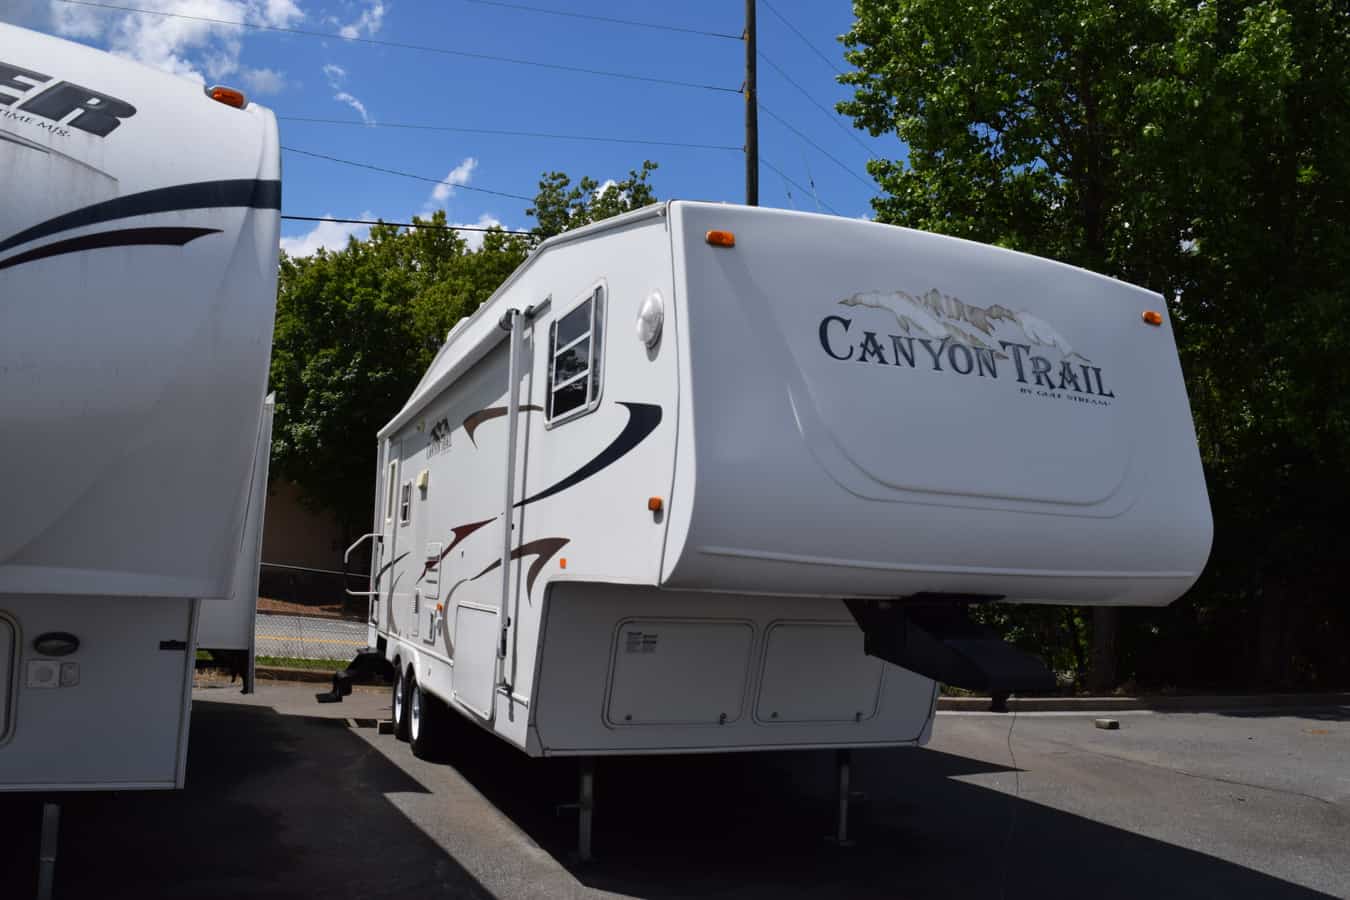 USED 2006 Gulfstream CANYON TRAIL 27FRBW